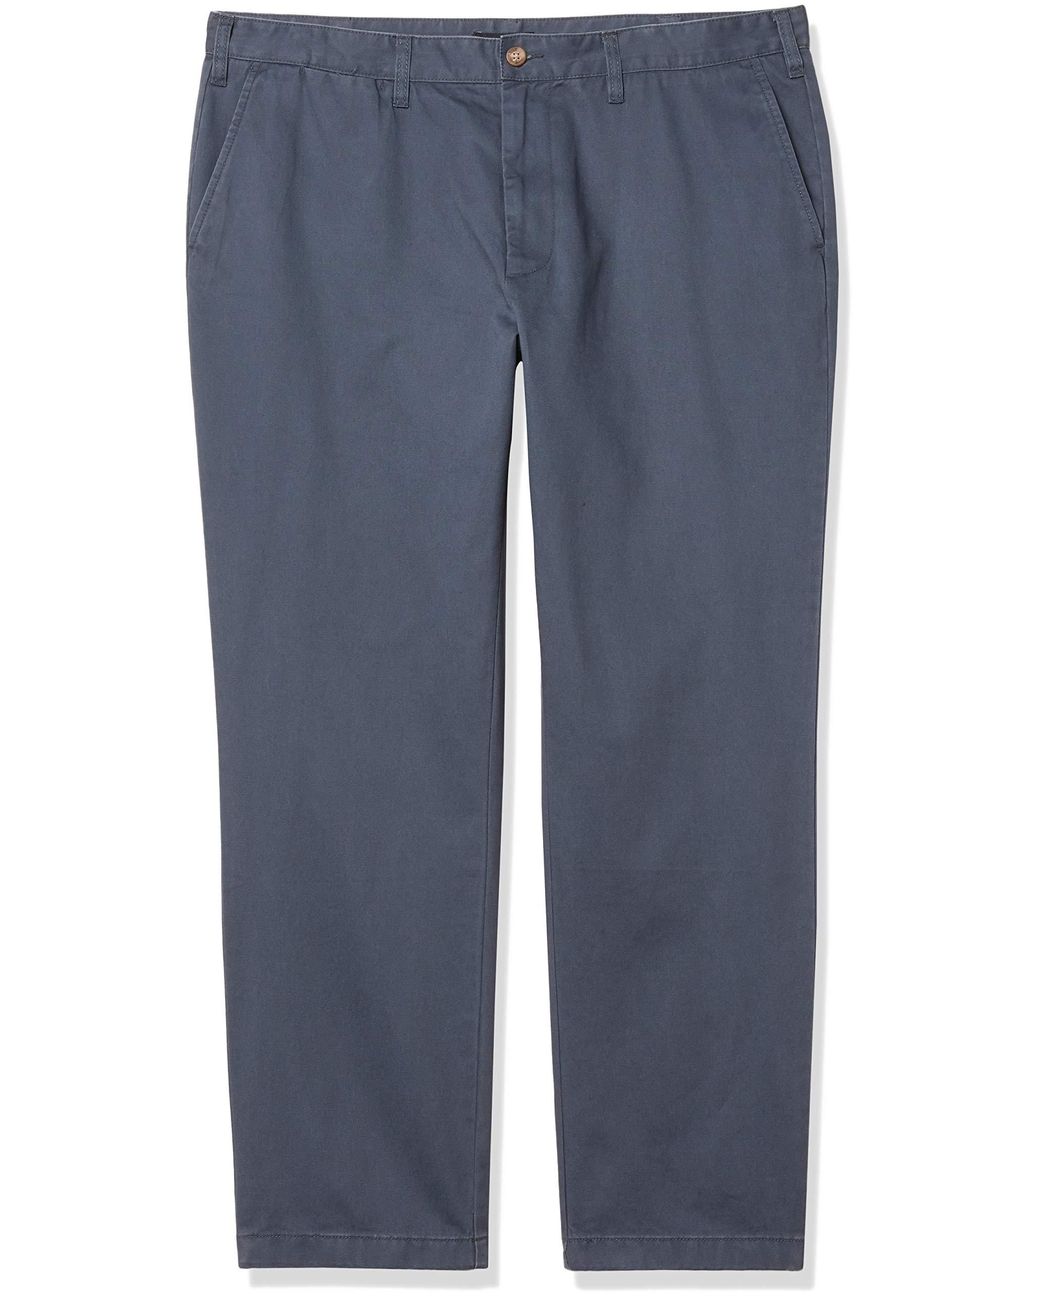 Nautica Chino Pants in Blue for Men - Lyst